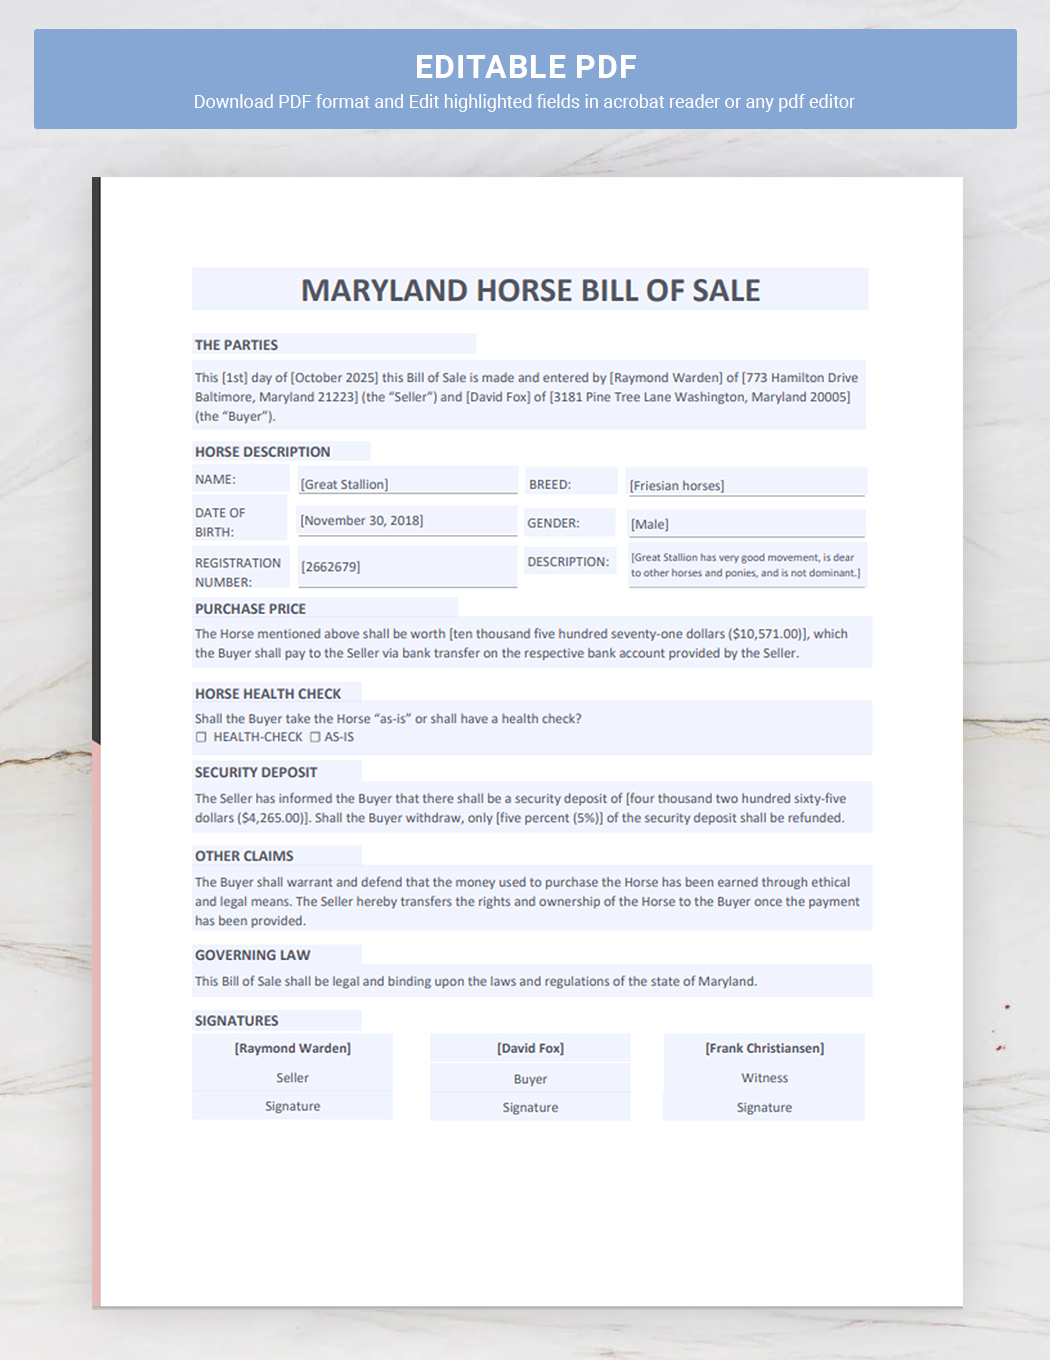 Maryland Horse Bill of Sale Template